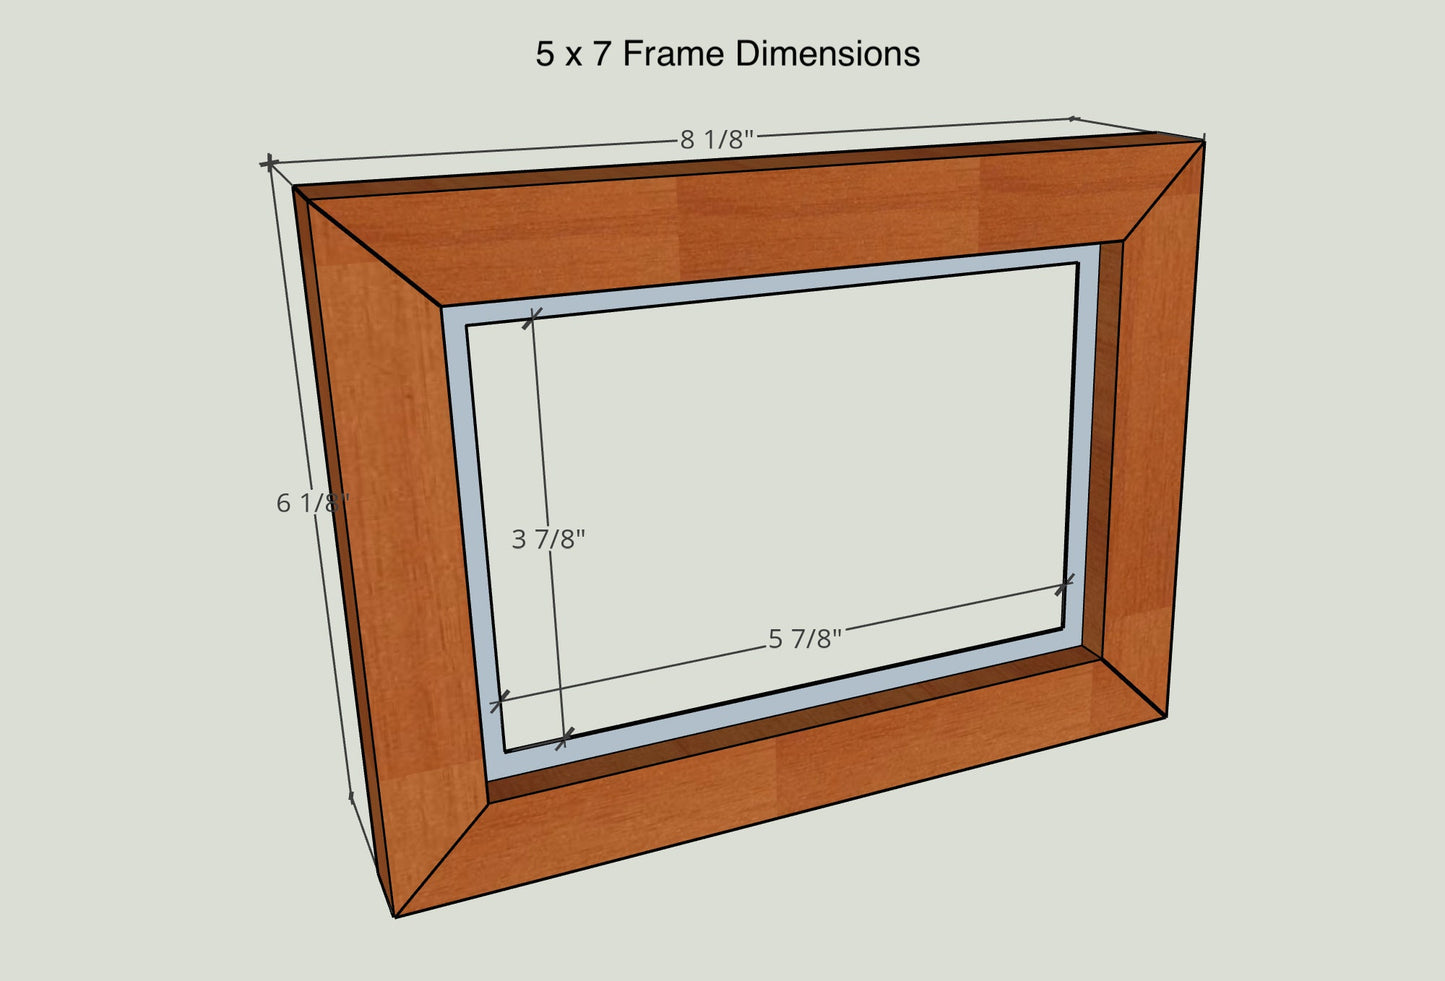 Ambrosia Maple Hardwood Gallery Frame - Picture Frame | Natural Wood Frame